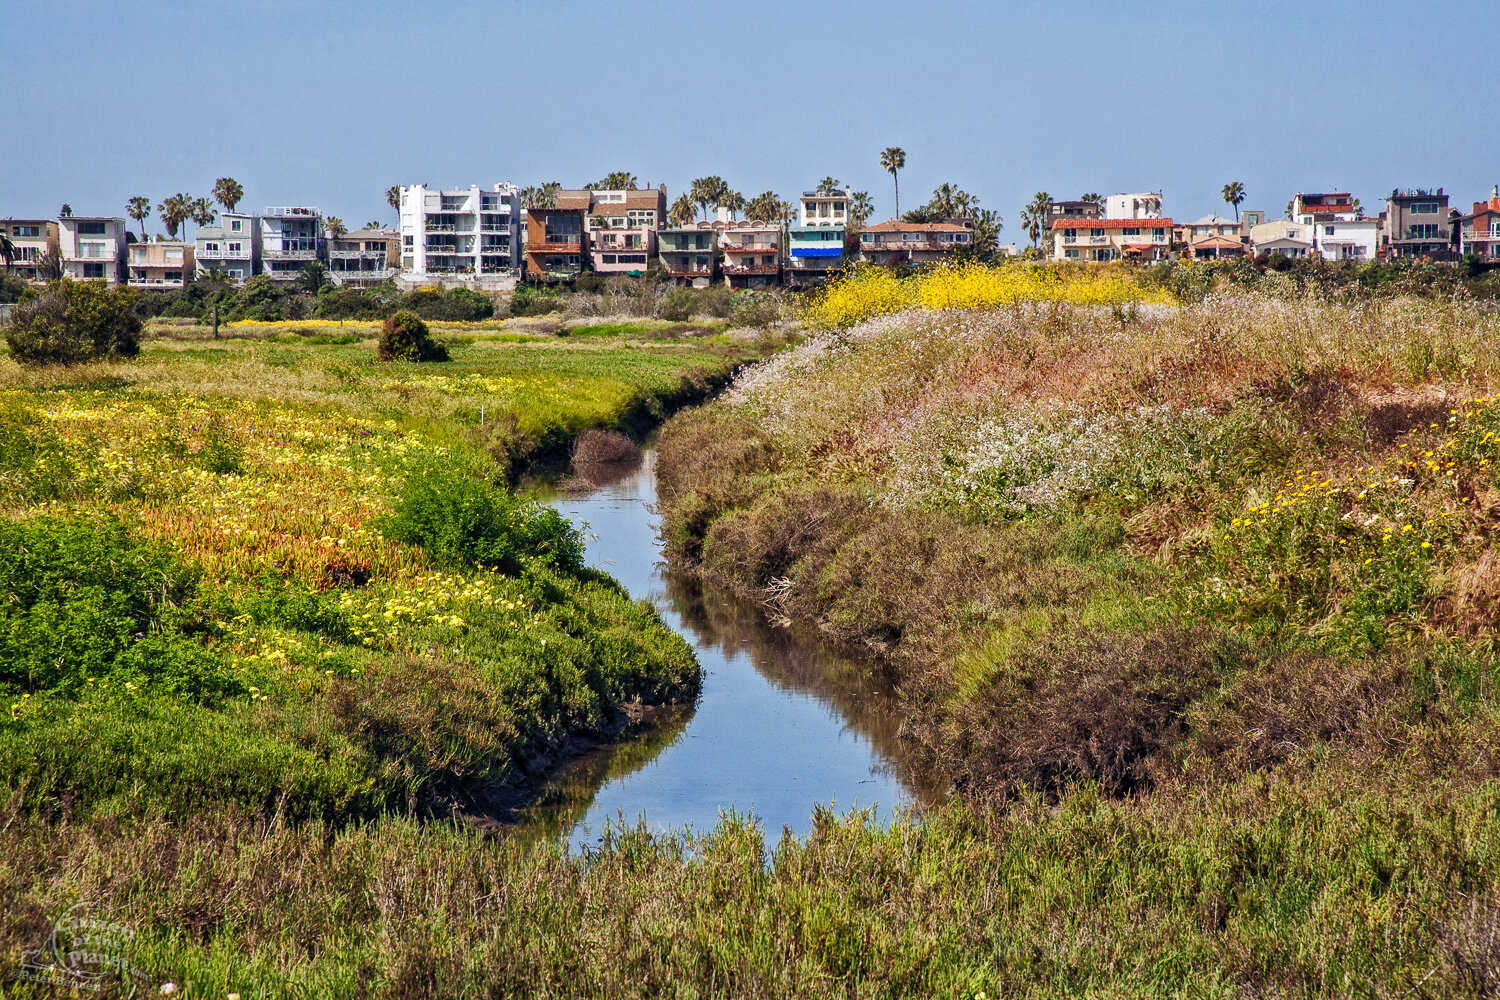  Wildflowers grow abundantly in the wetlands in the Spring, the beach town of Playa Del Rey in the background. 